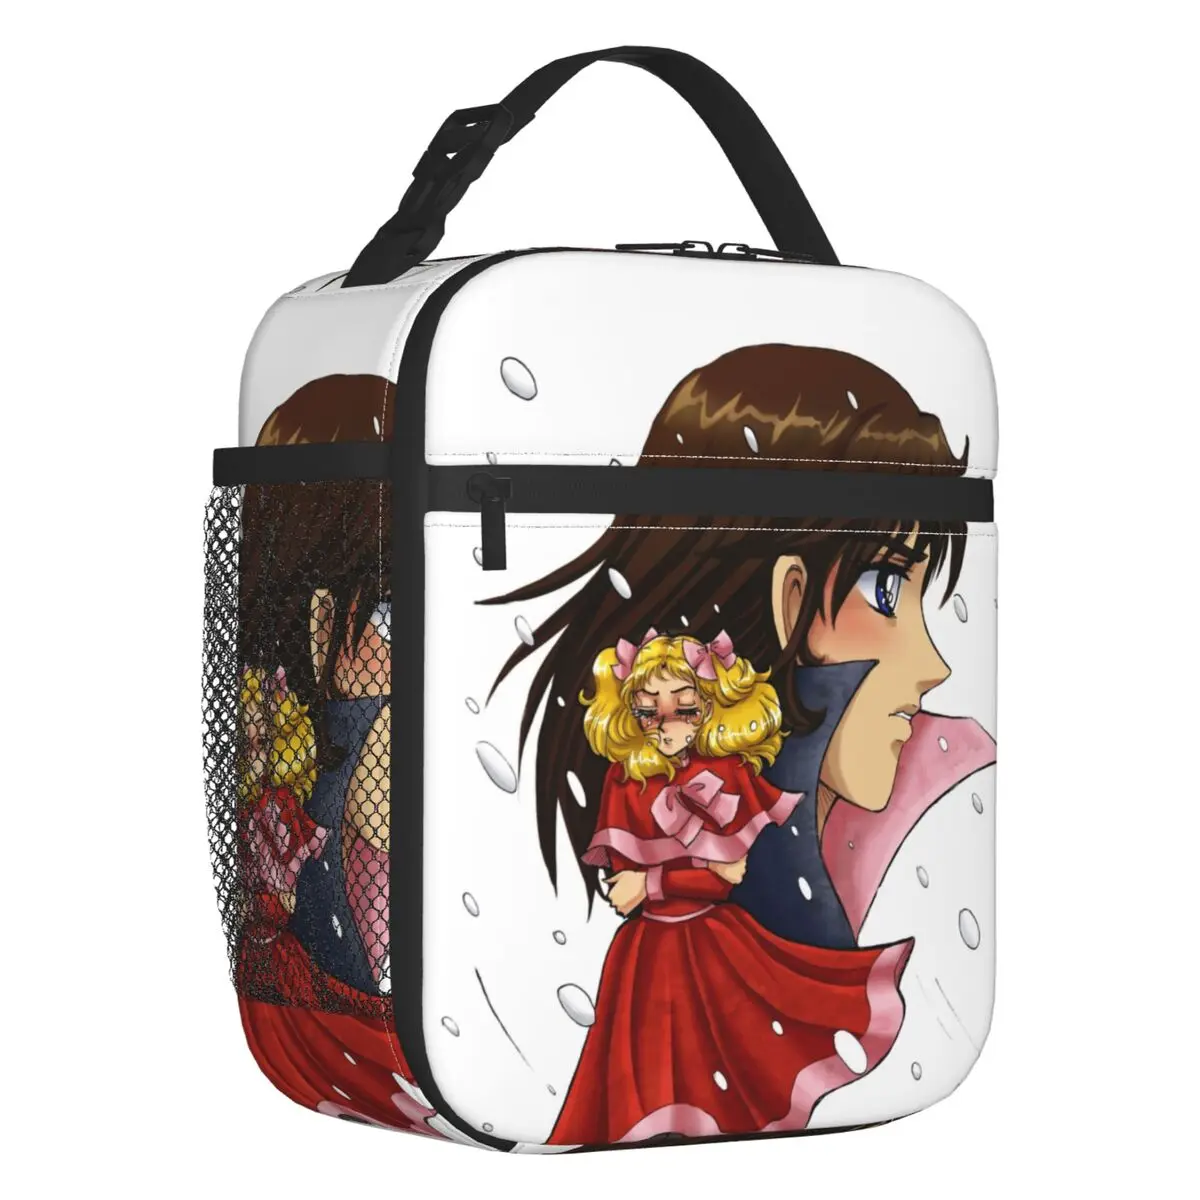 Cartoon Candy Candy Terry Snow Portable Lunch Boxes Multifunction Anime Cooler Thermal Food Insulated Lunch Bag Office Work